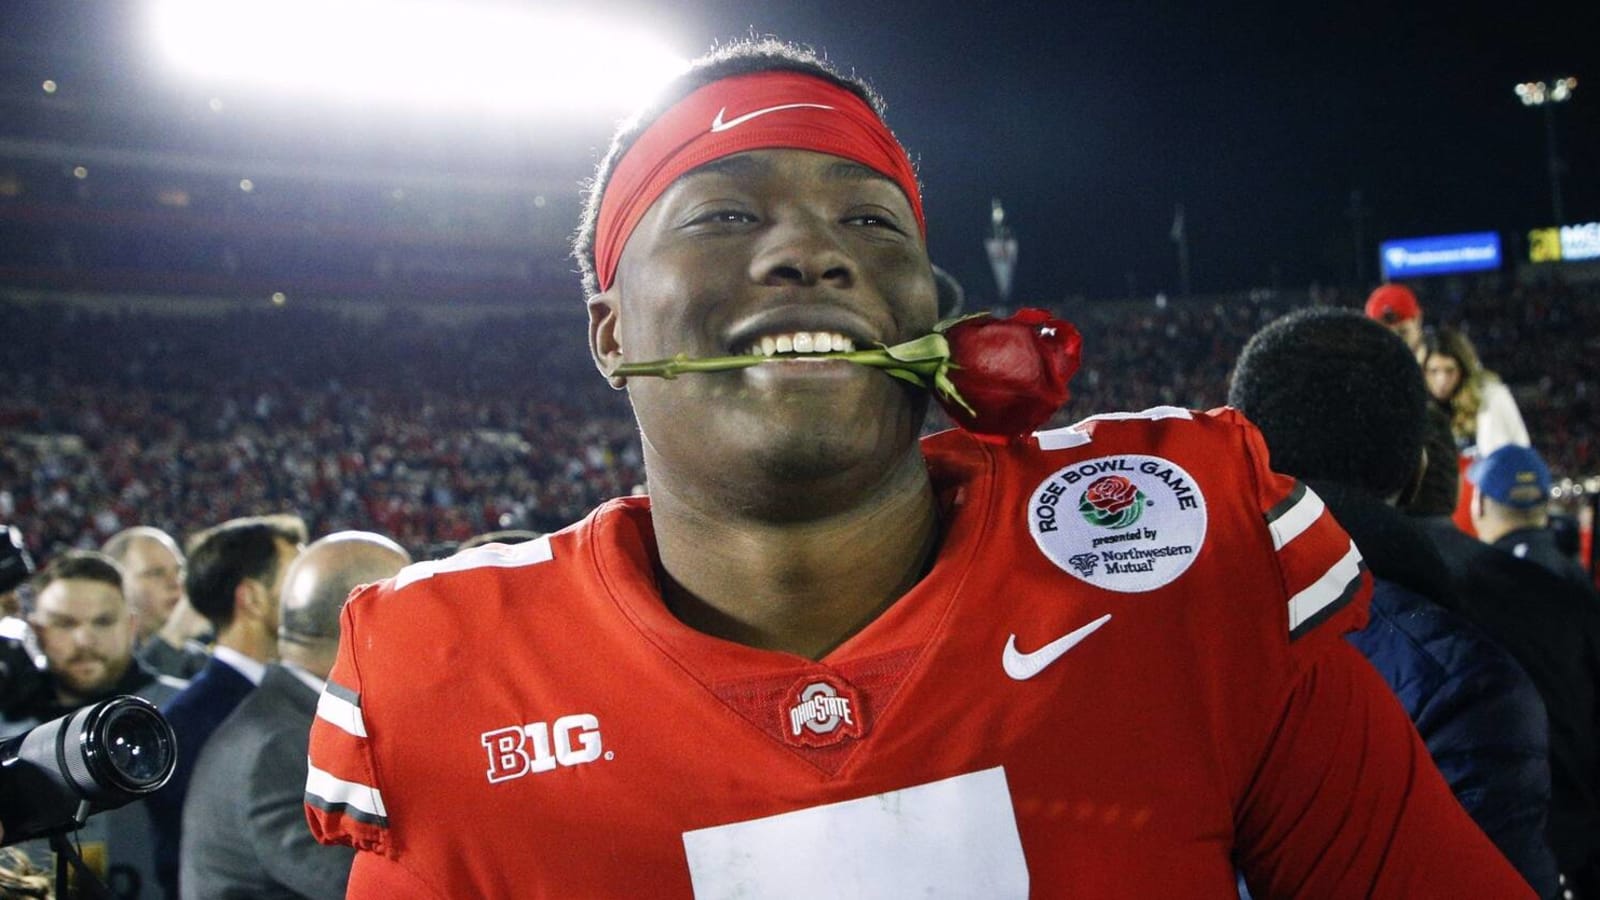 Wife of Dwayne Haskins issues statement following autopsy results